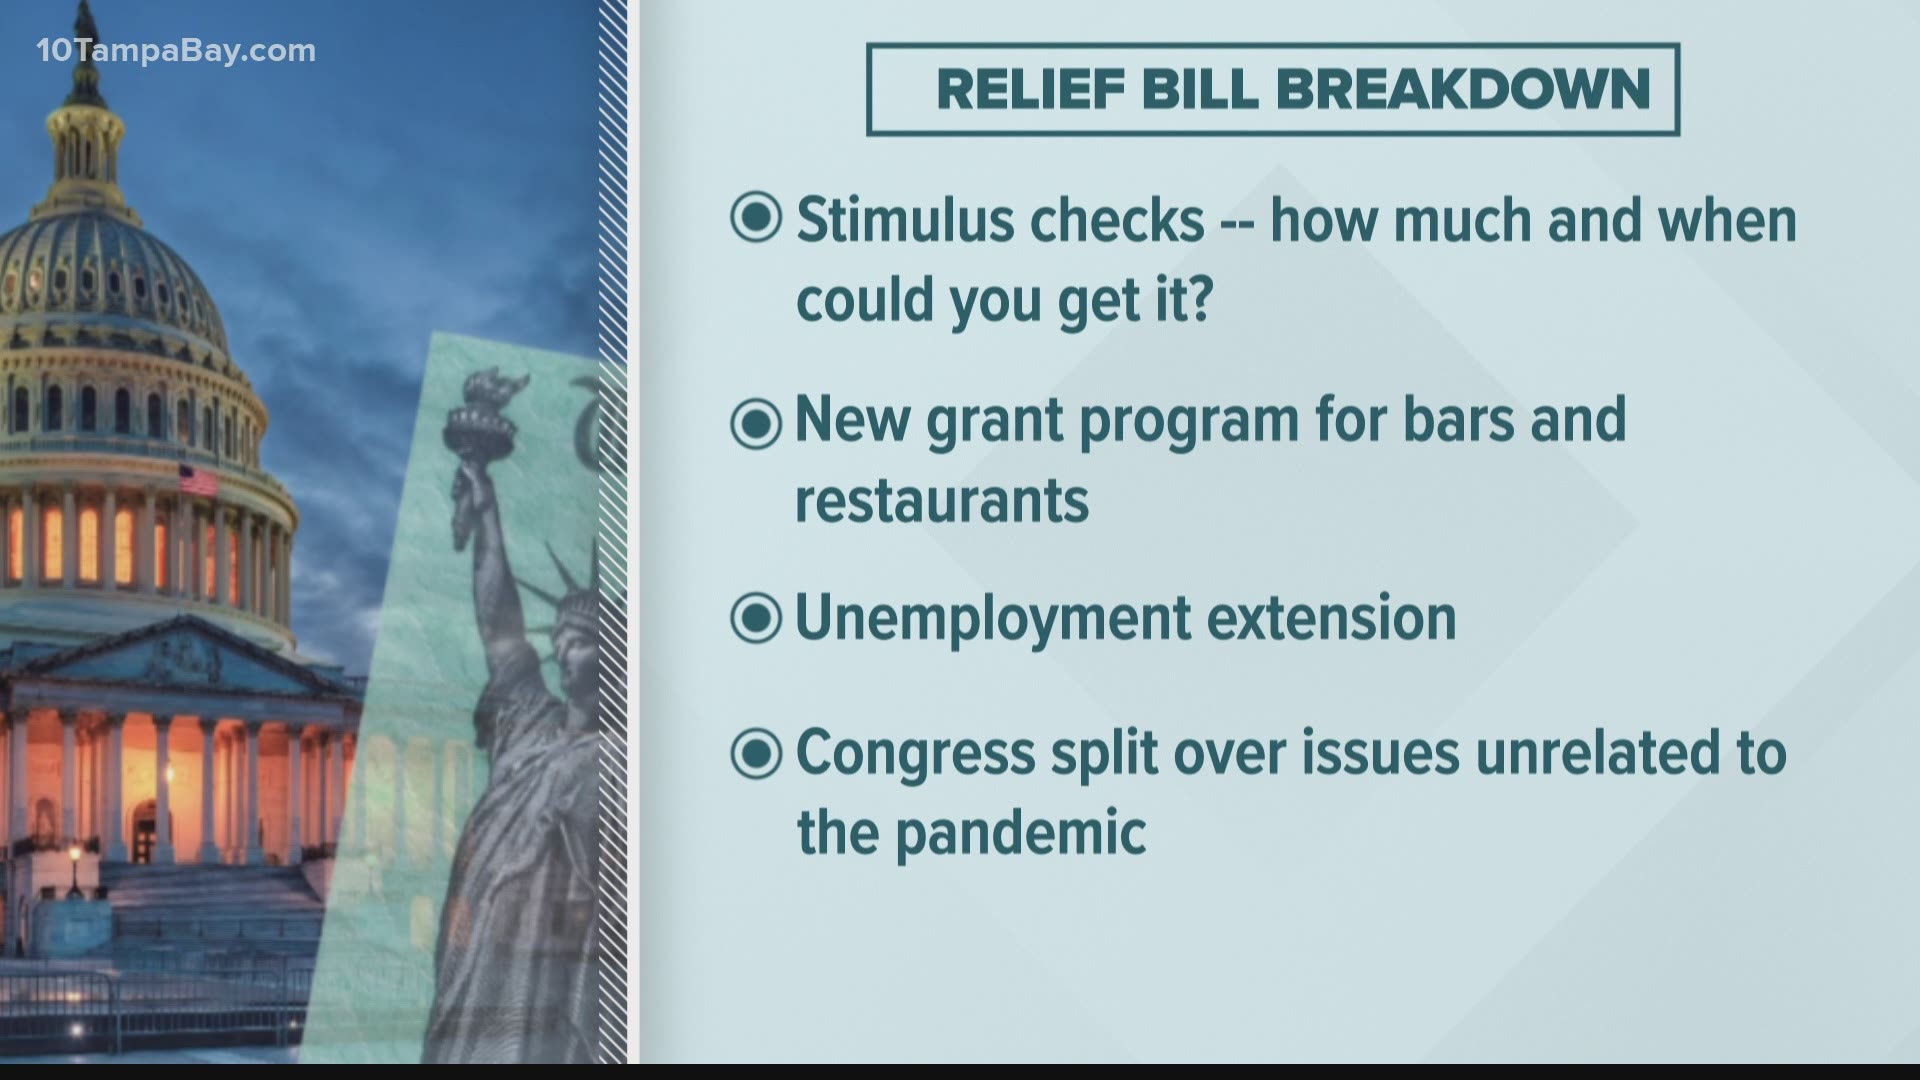 President Biden plans to sign the COVID-19 relief plan, which includes a third round of stimulus payments, on Friday. Here's a look at when checks could go out.